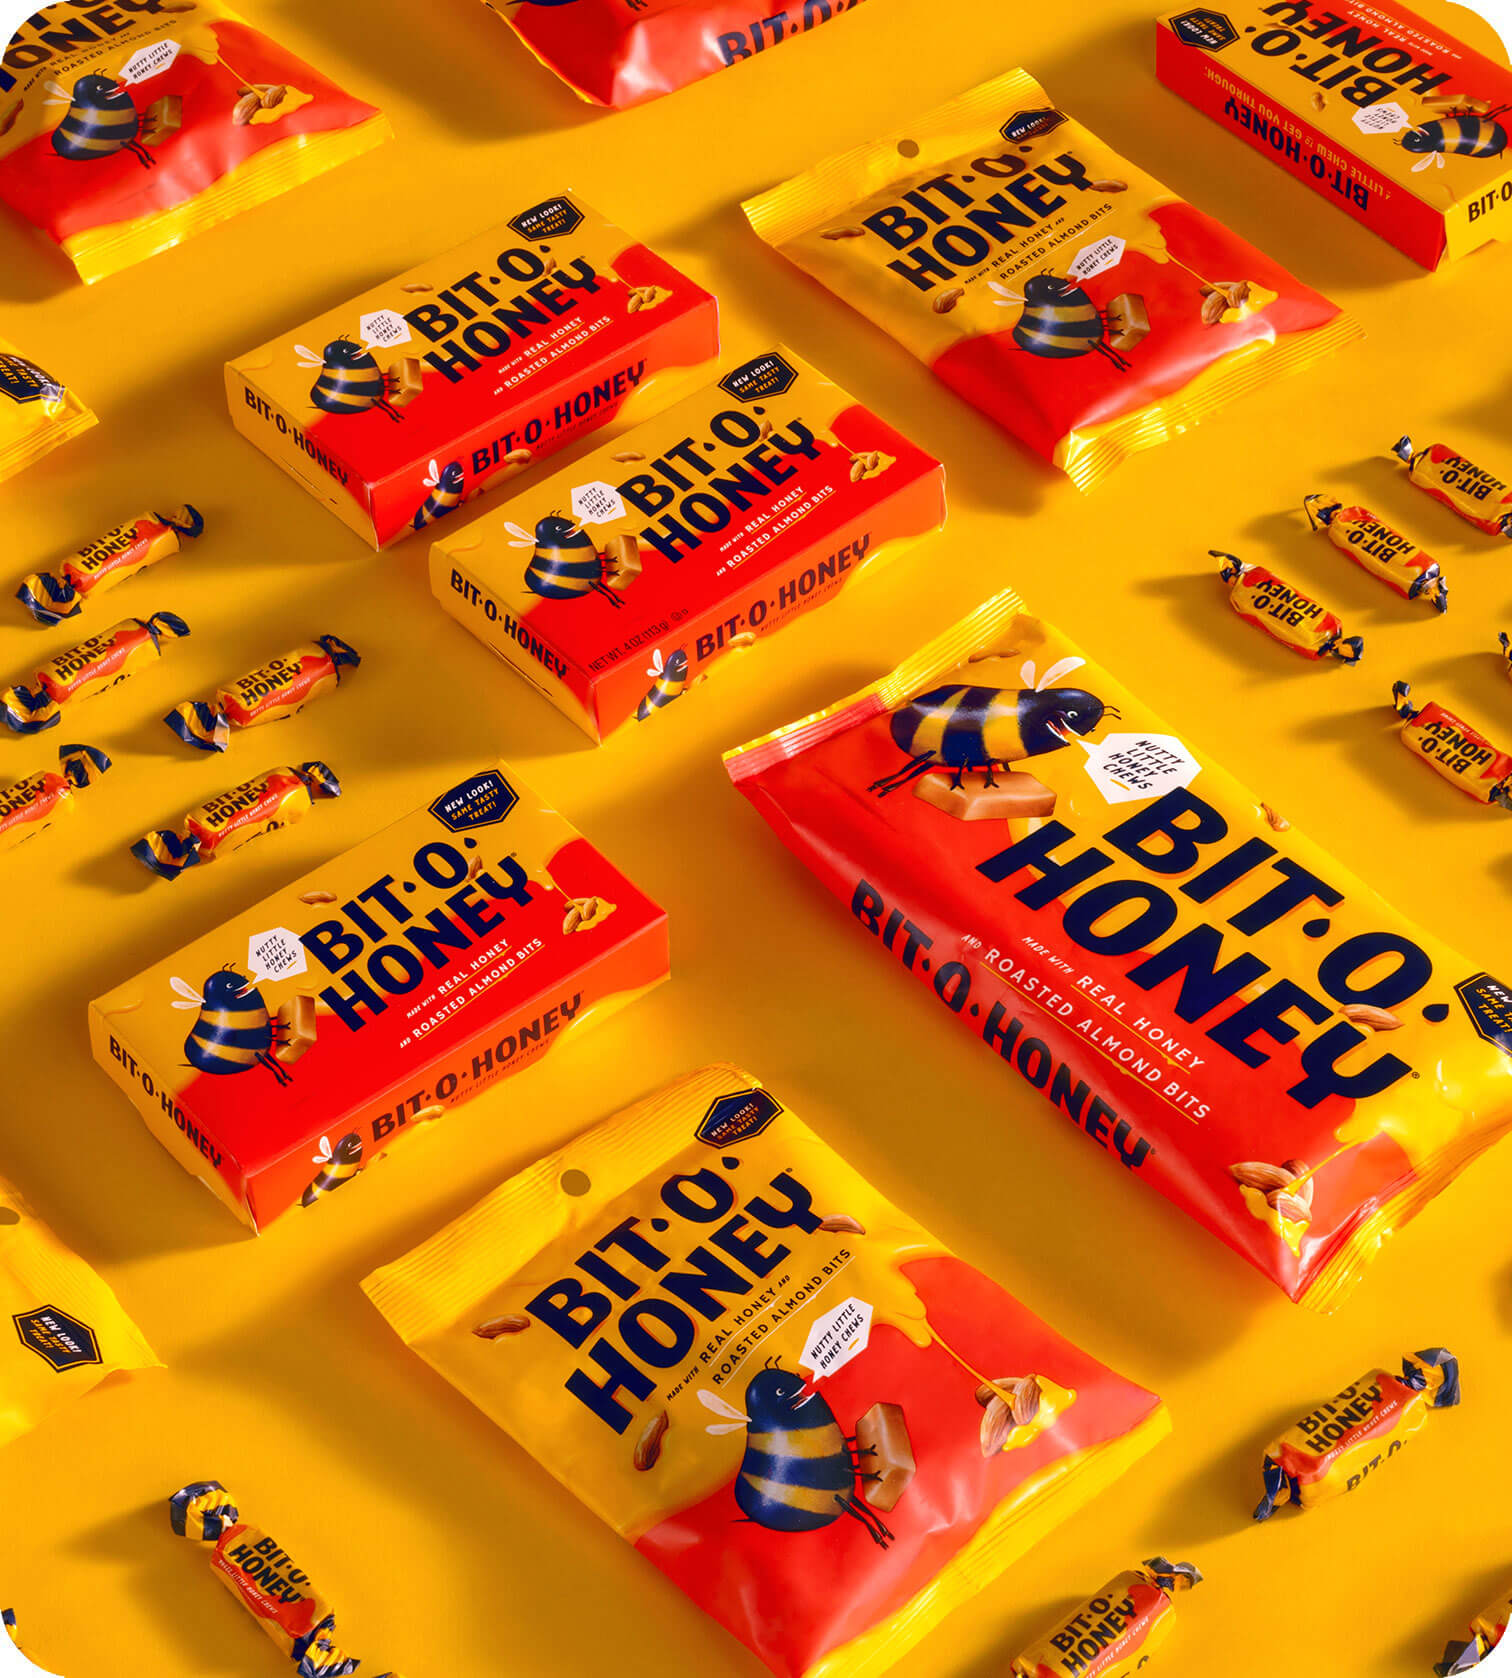 A grid of Bit-O-Honey bags, boxes, and candies